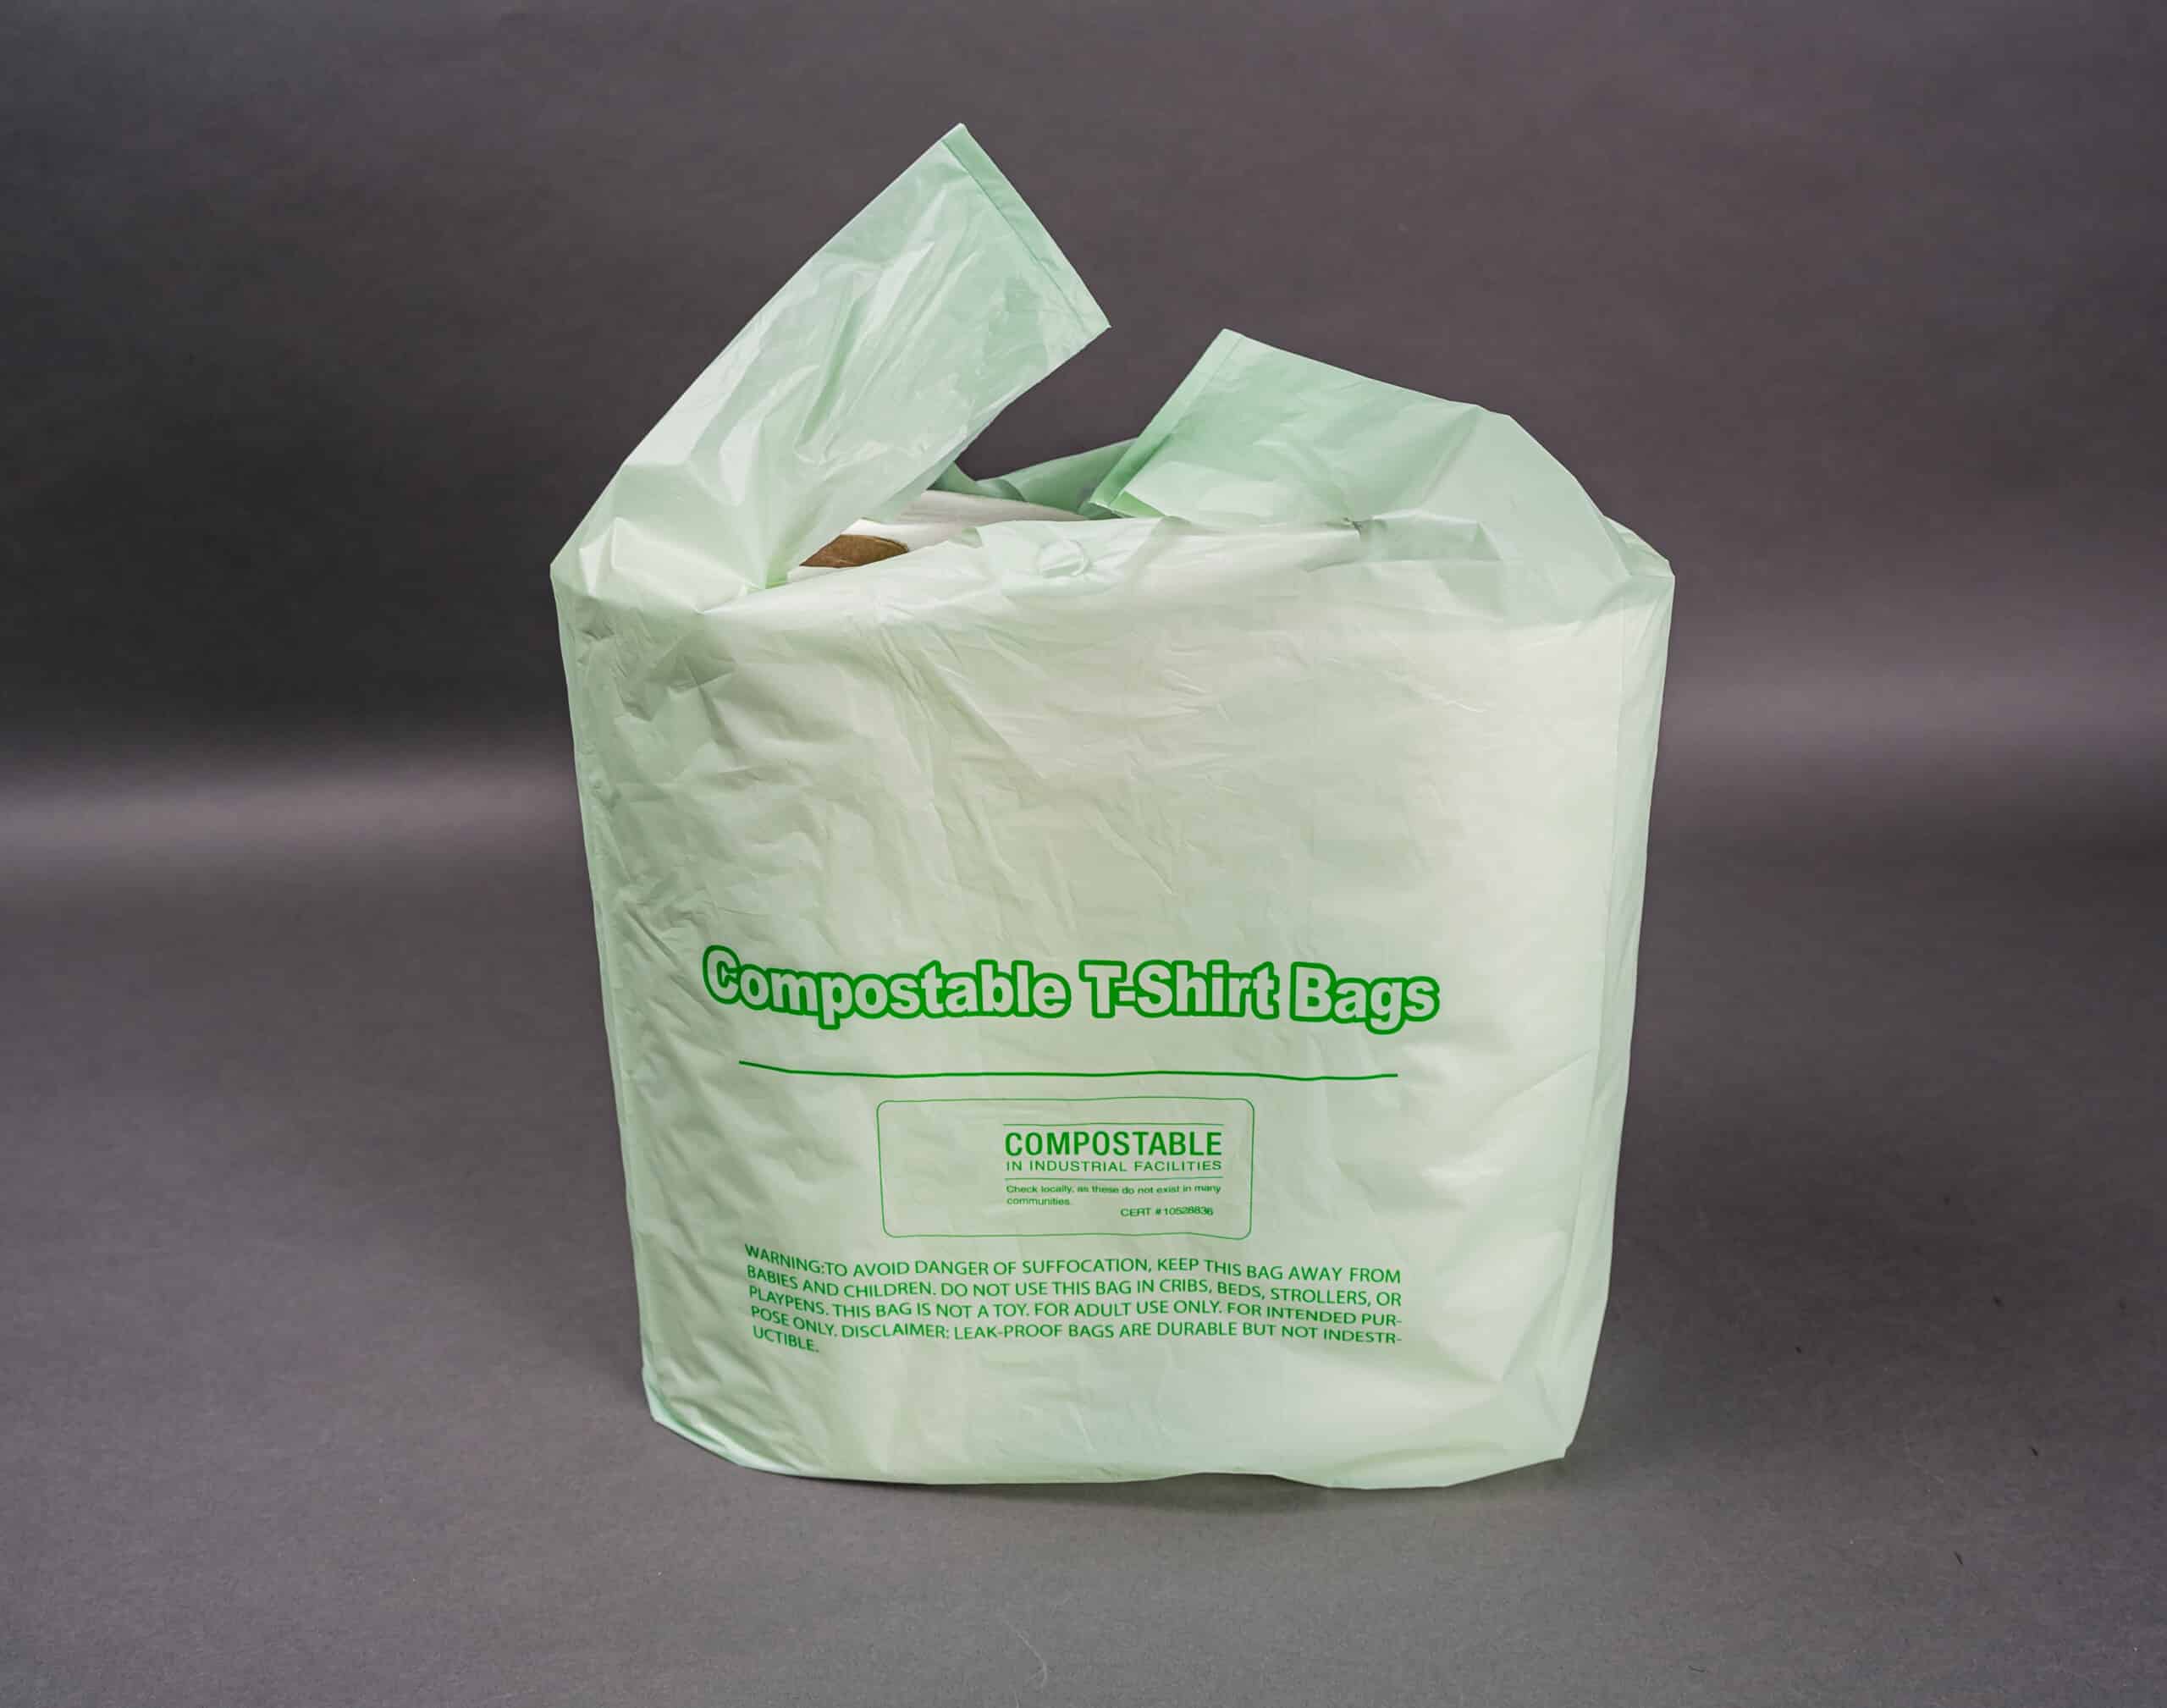 Personalized plastic bags for retailers